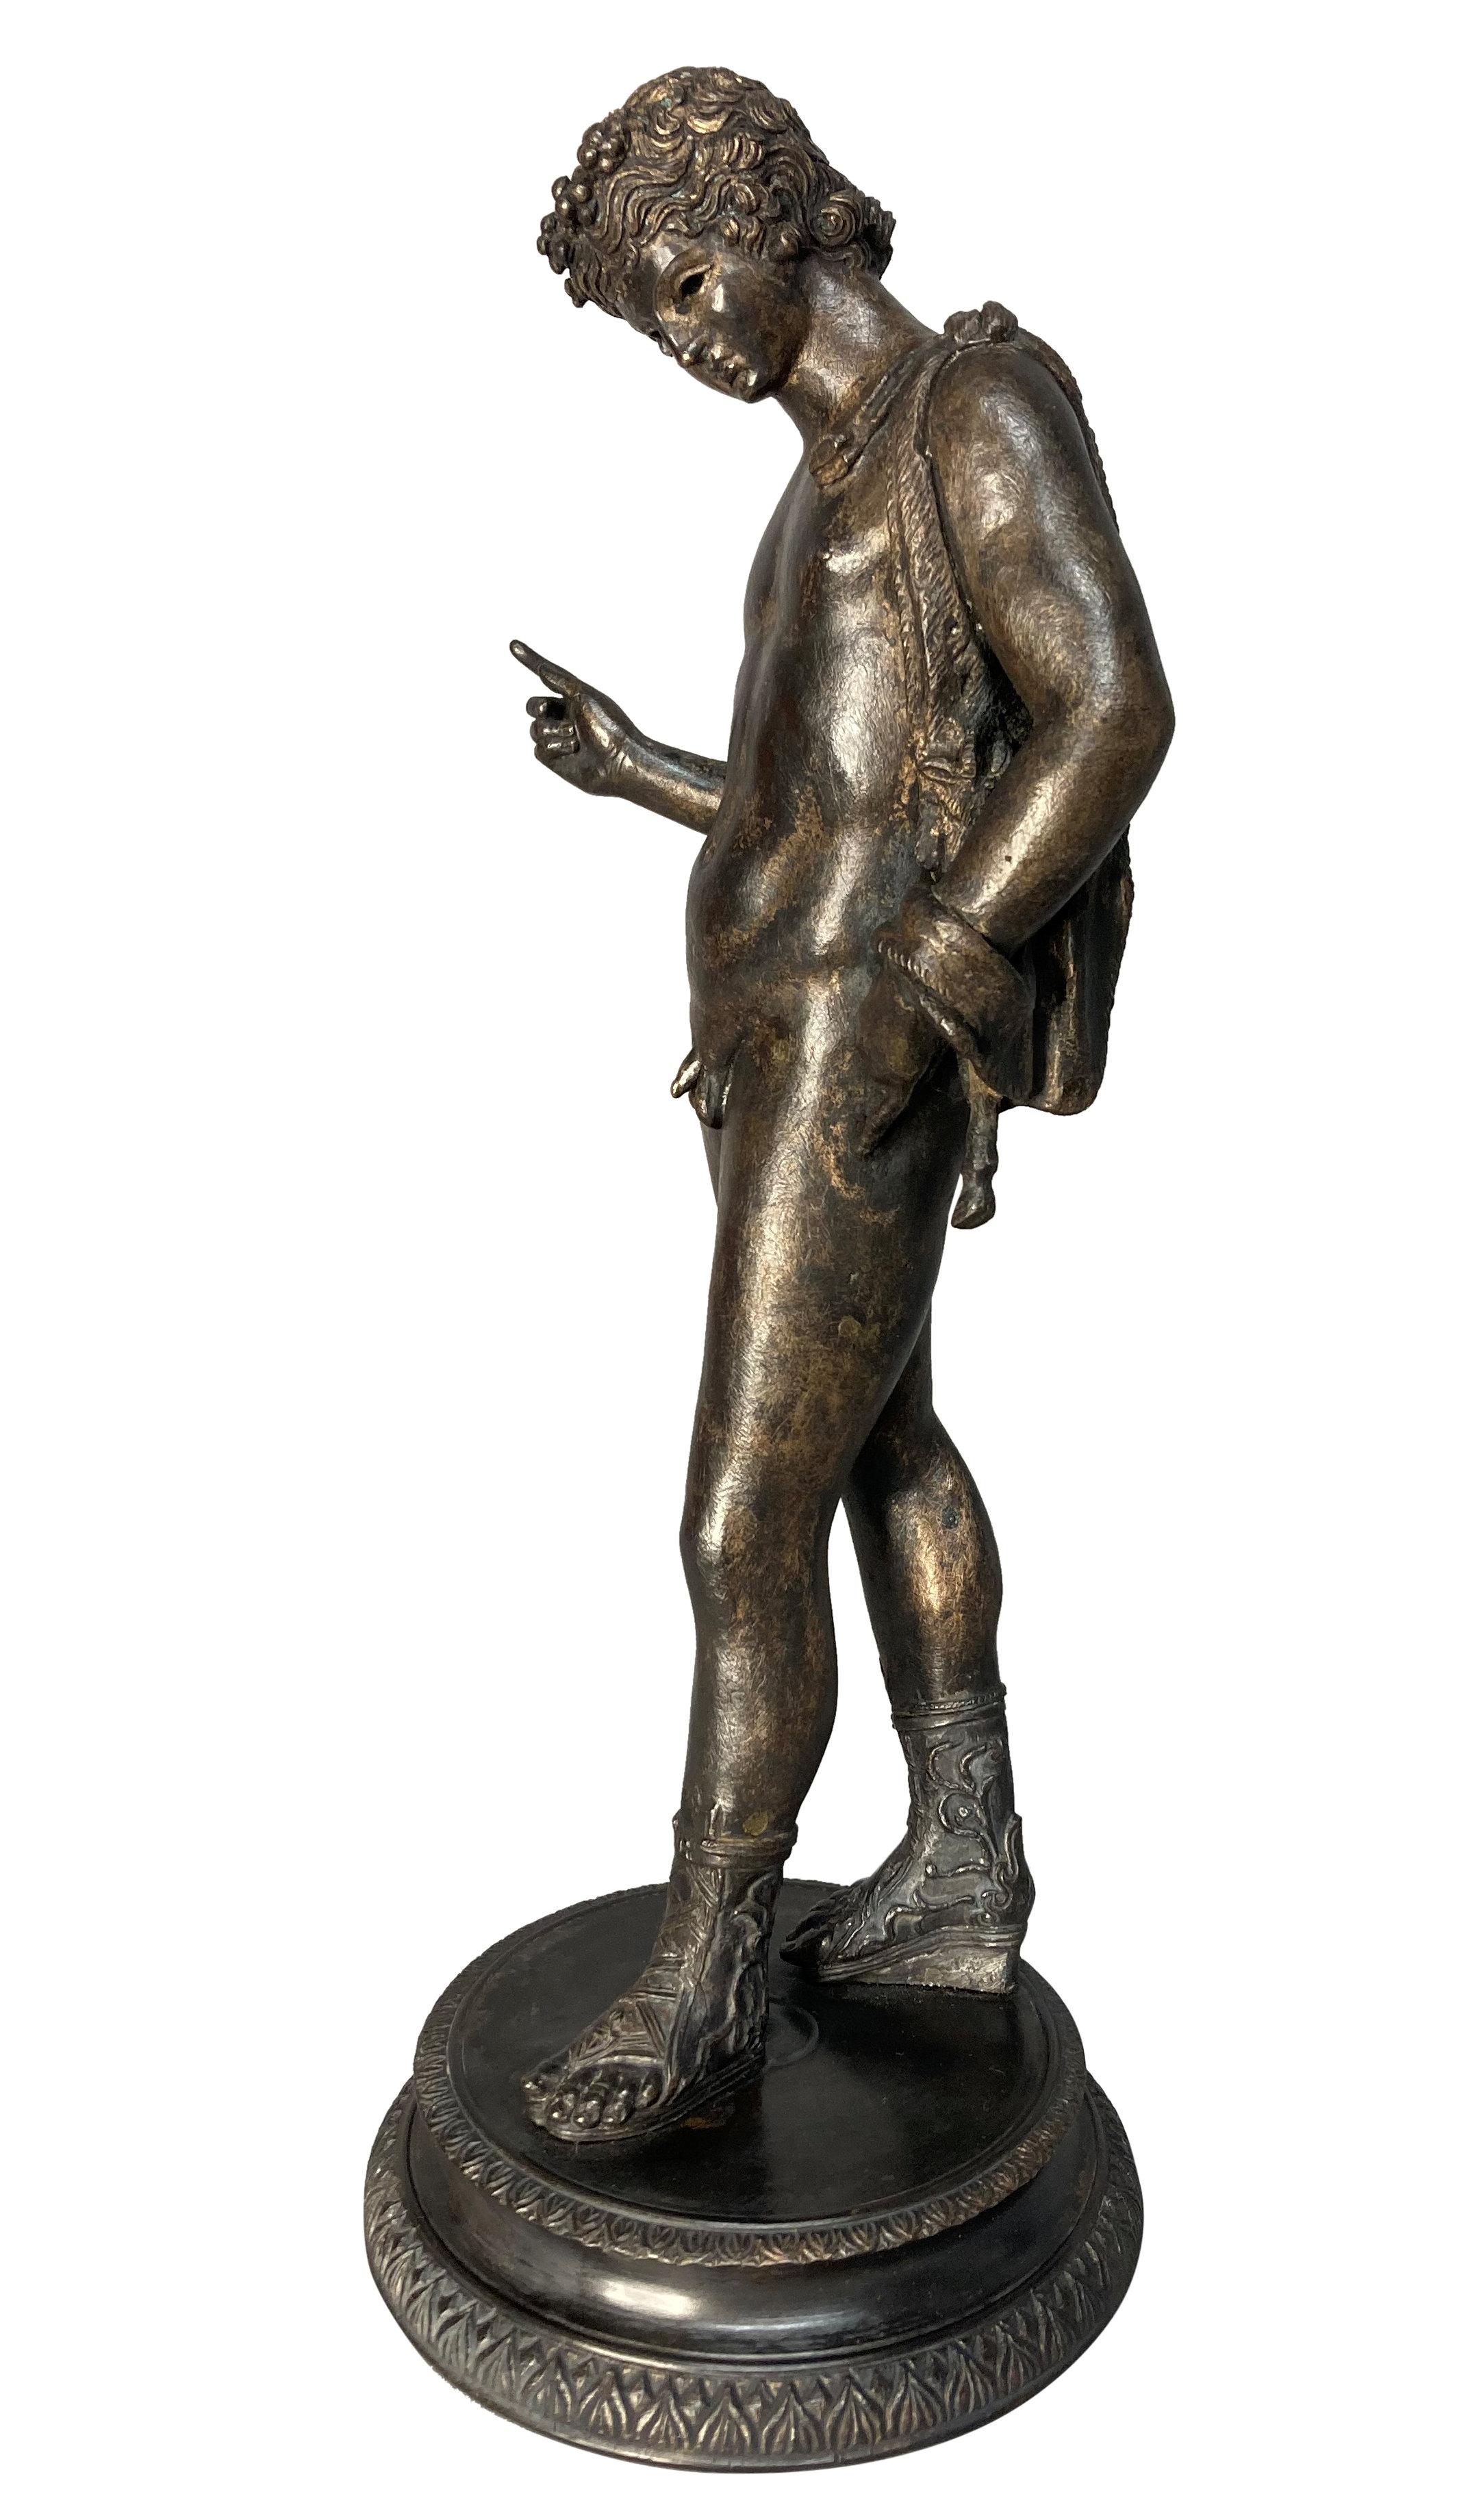 An English Grand Tour bronze figure of Narcissus, with very fine detailing.